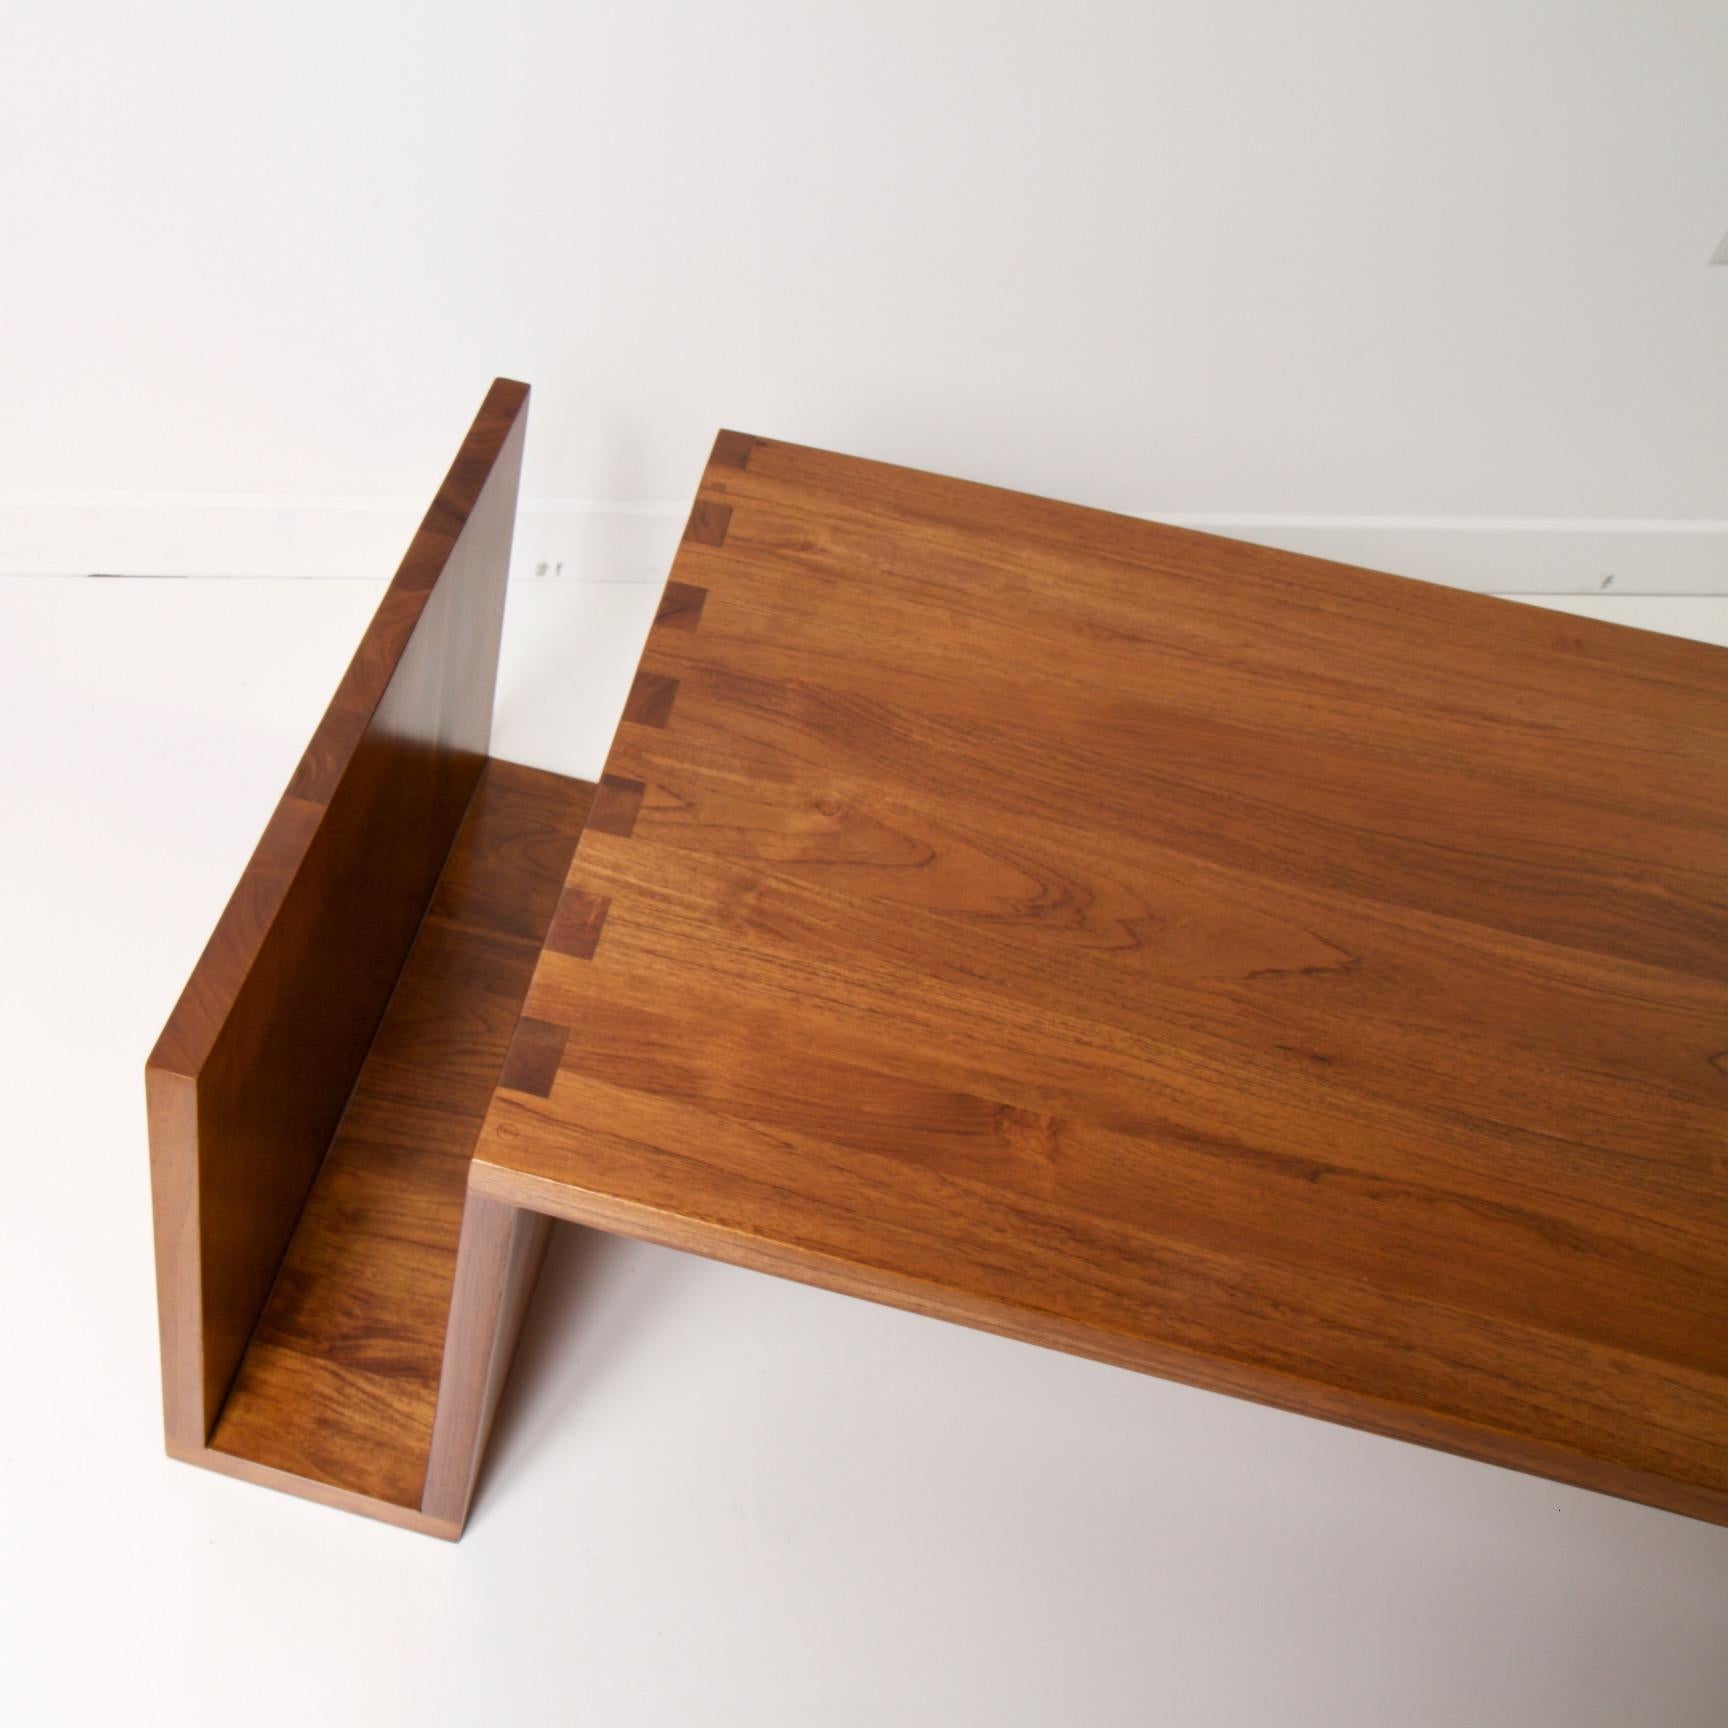 American Dovetailed Walnut Coffee Table